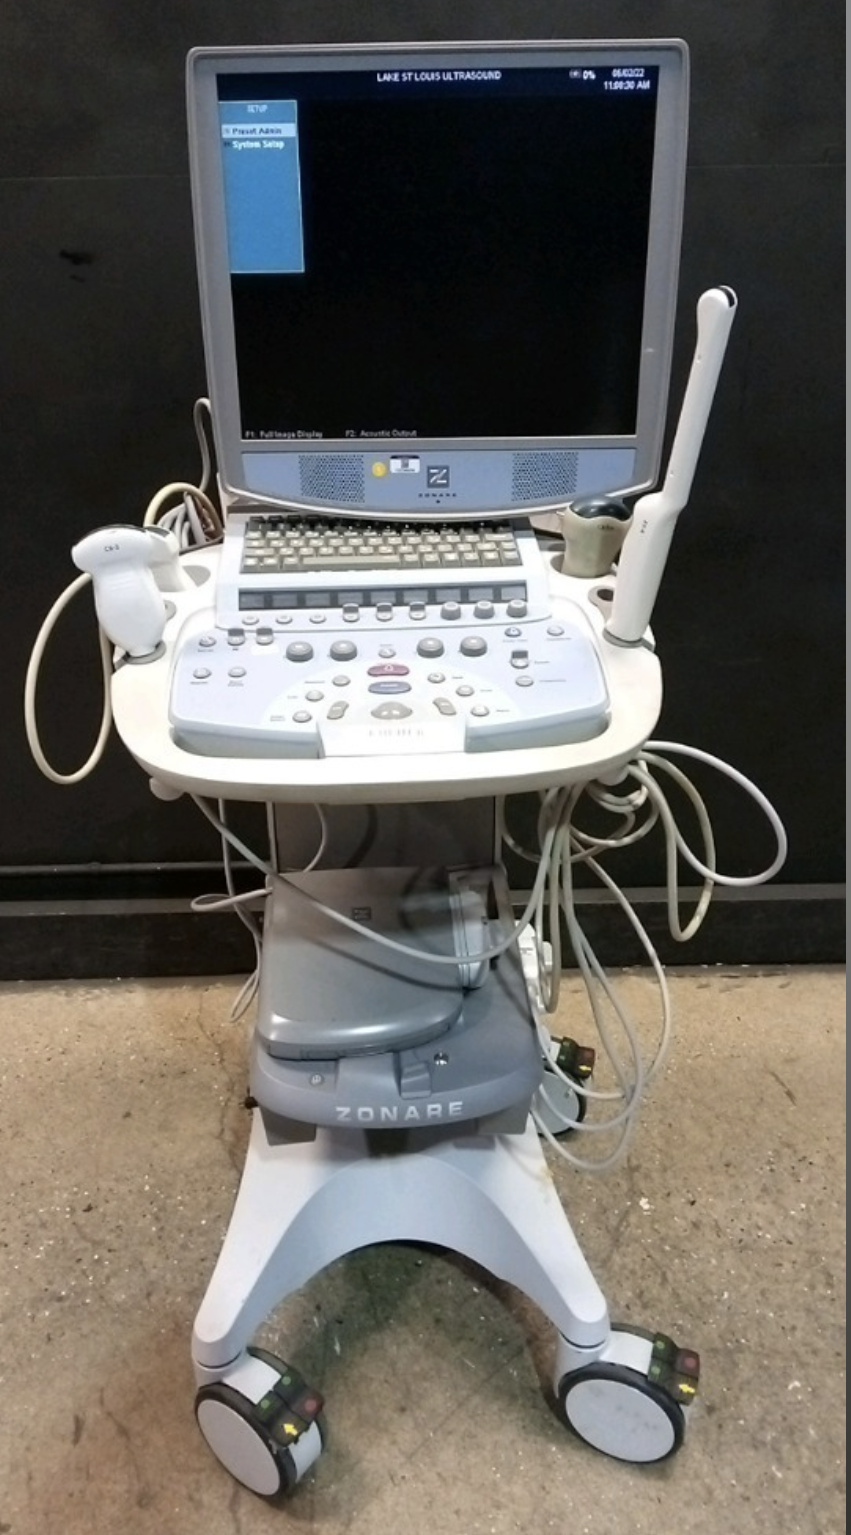 ZONARE Z ONE ULTRASOUND MACHINE WITH 4 PROBES - C6-2, E9-4, C8-33D, C9-3 DIAGNOSTIC ULTRASOUND MACHINES FOR SALE